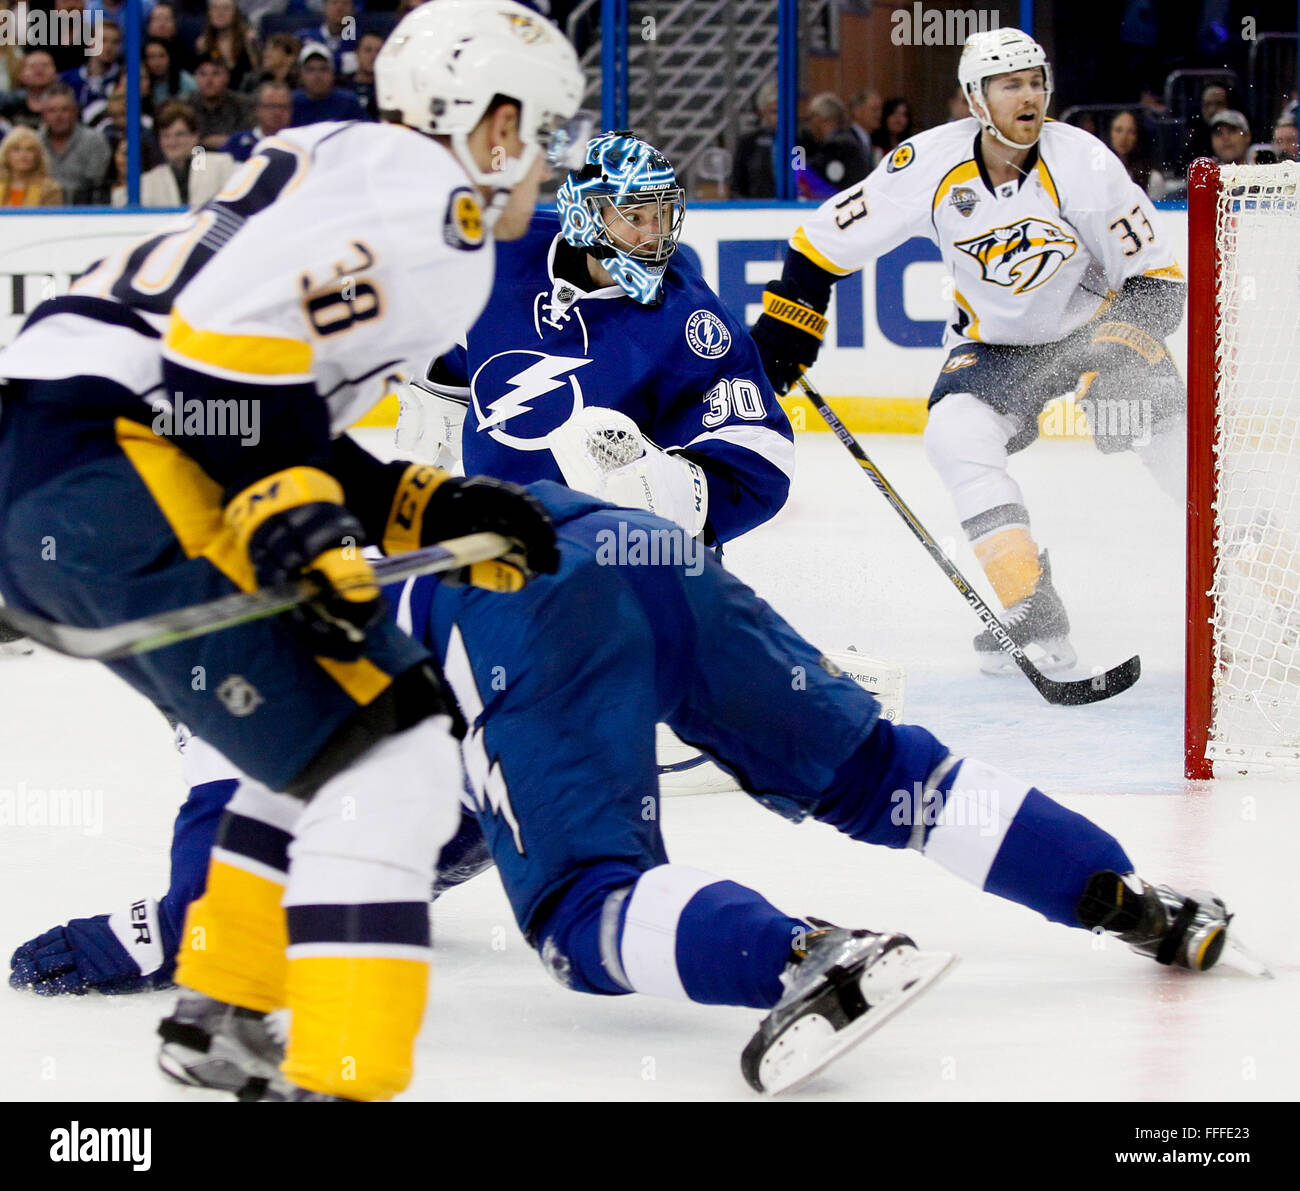 Tampa, Florida, USA. 12th Feb, 2016. DIRK SHADD | Times .Tampa Bay Lightning goalie Ben Bishop (30) works to keep the puck out as legs go flying with Nashville Predators right wing Viktor Arvidsson (38) and Predators center Colin Wilson (33) closing in during second period action at the Amalie Arena in Tampa Friday evening (02/12/16) © Dirk Shadd/Tampa Bay Times/ZUMA Wire/Alamy Live News Stock Photo